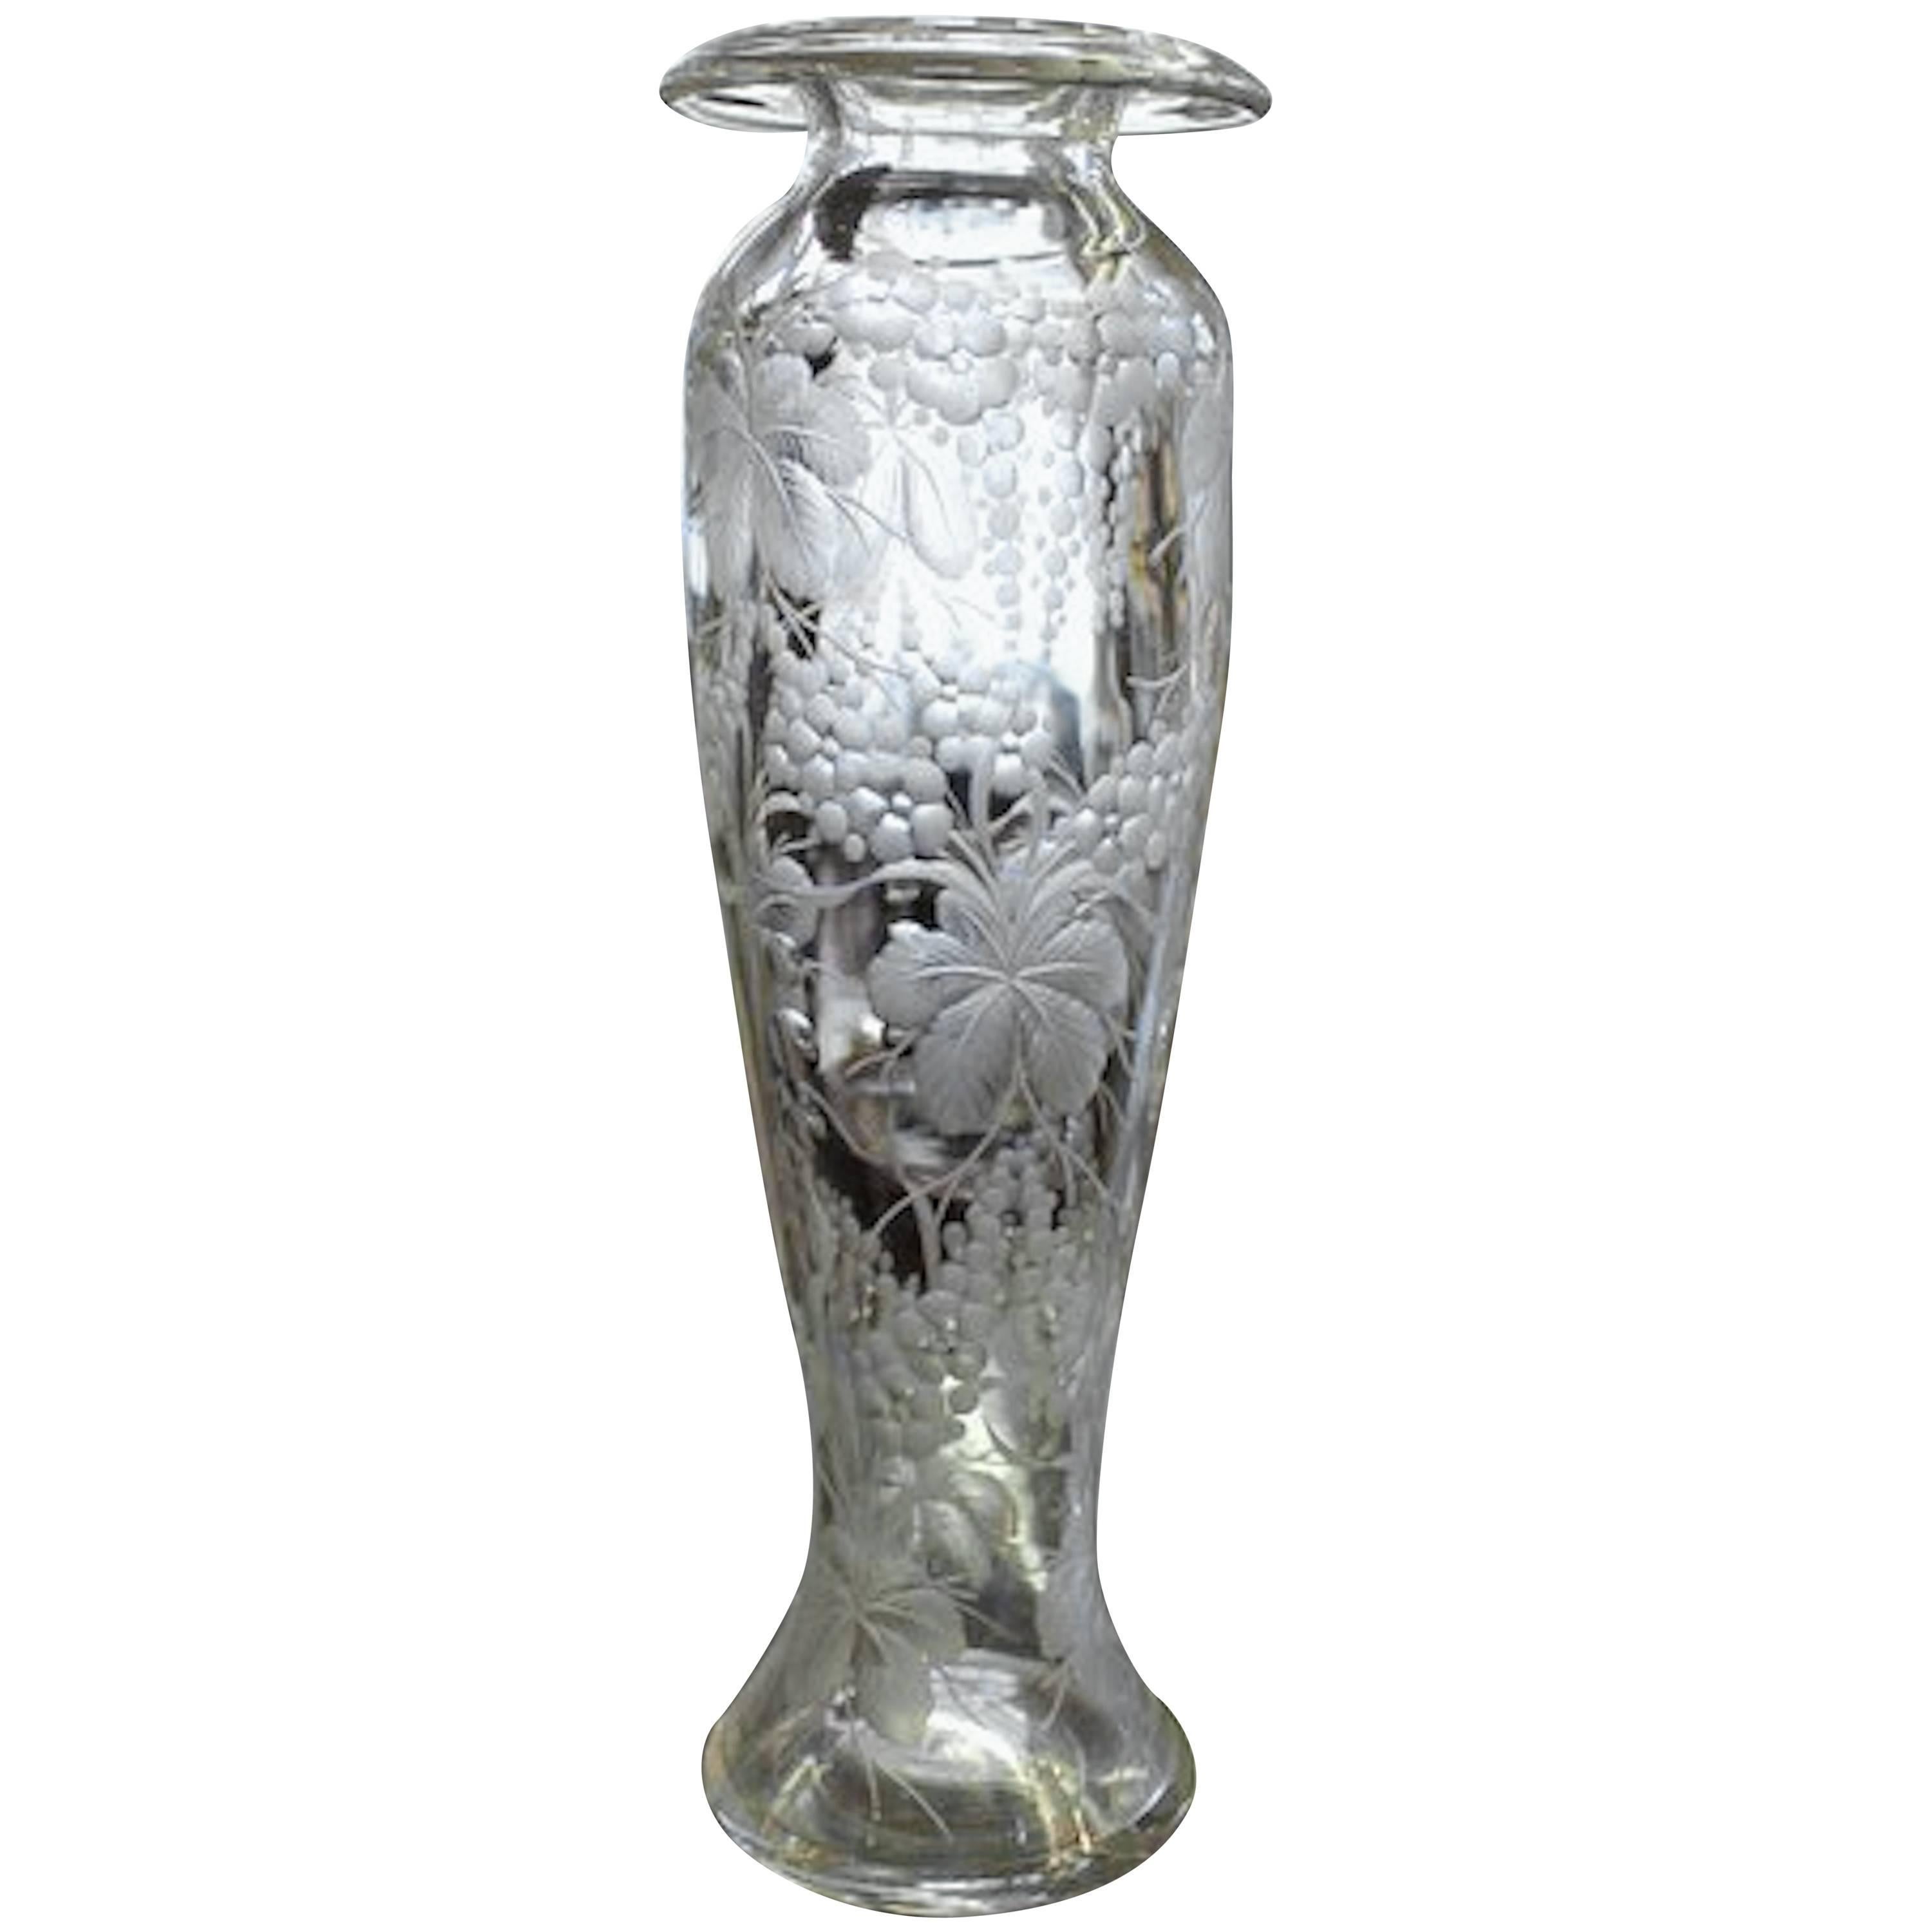 Early 20th Century Signed "Libbey" Hand Engraved Intaglio Cut-Glass Vase